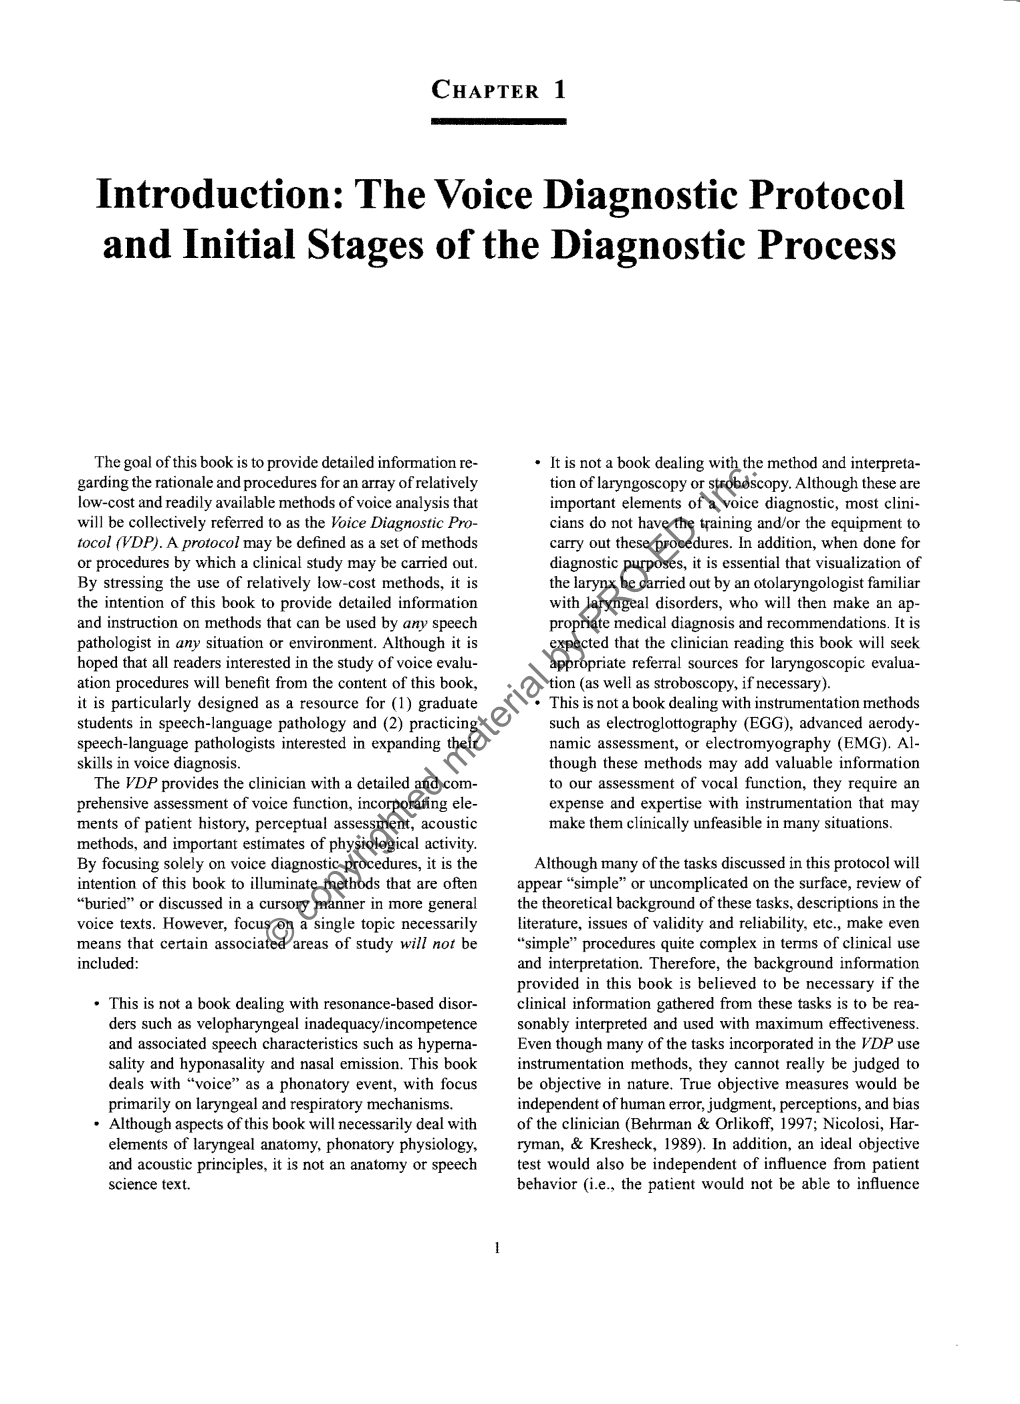 Introduction: the Voice Diagnostic Protocol and Initial Stages of the Diagnostic Process